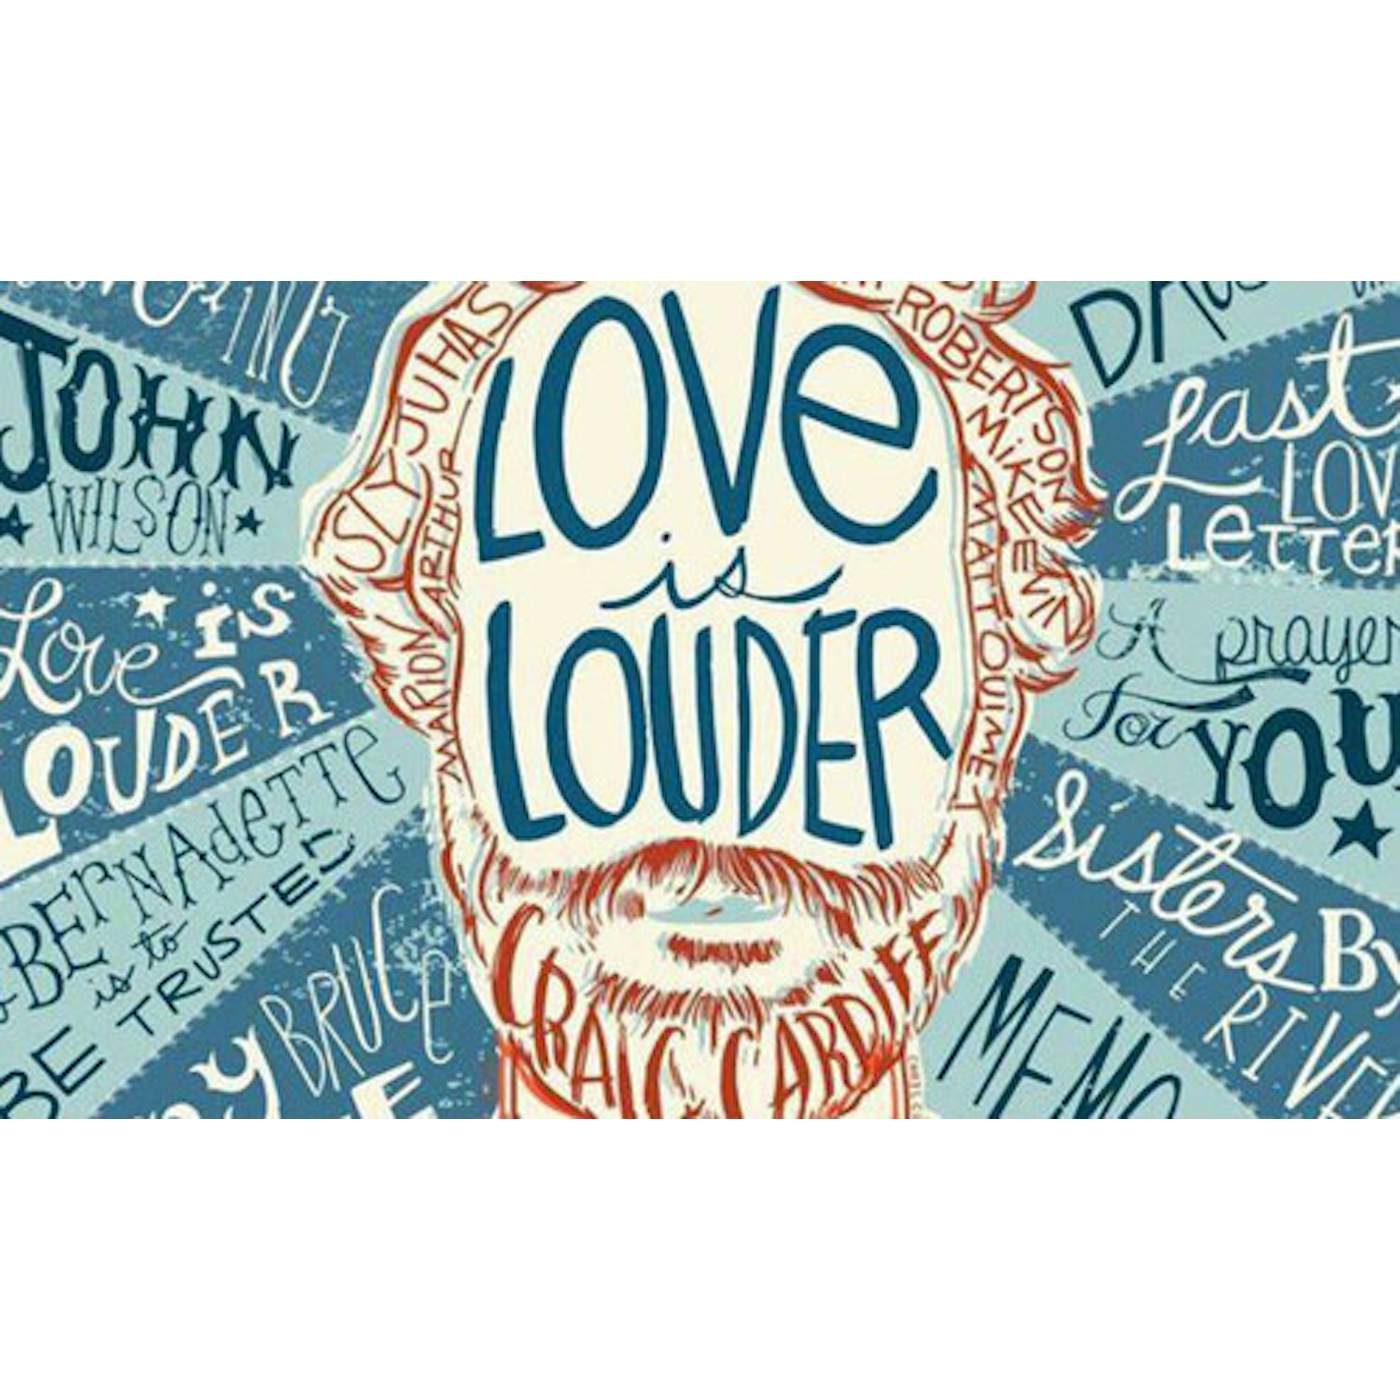 Craig Cardiff LOVE IS LOUDER (THAN ALL THIS NOISE) PT 2 CD